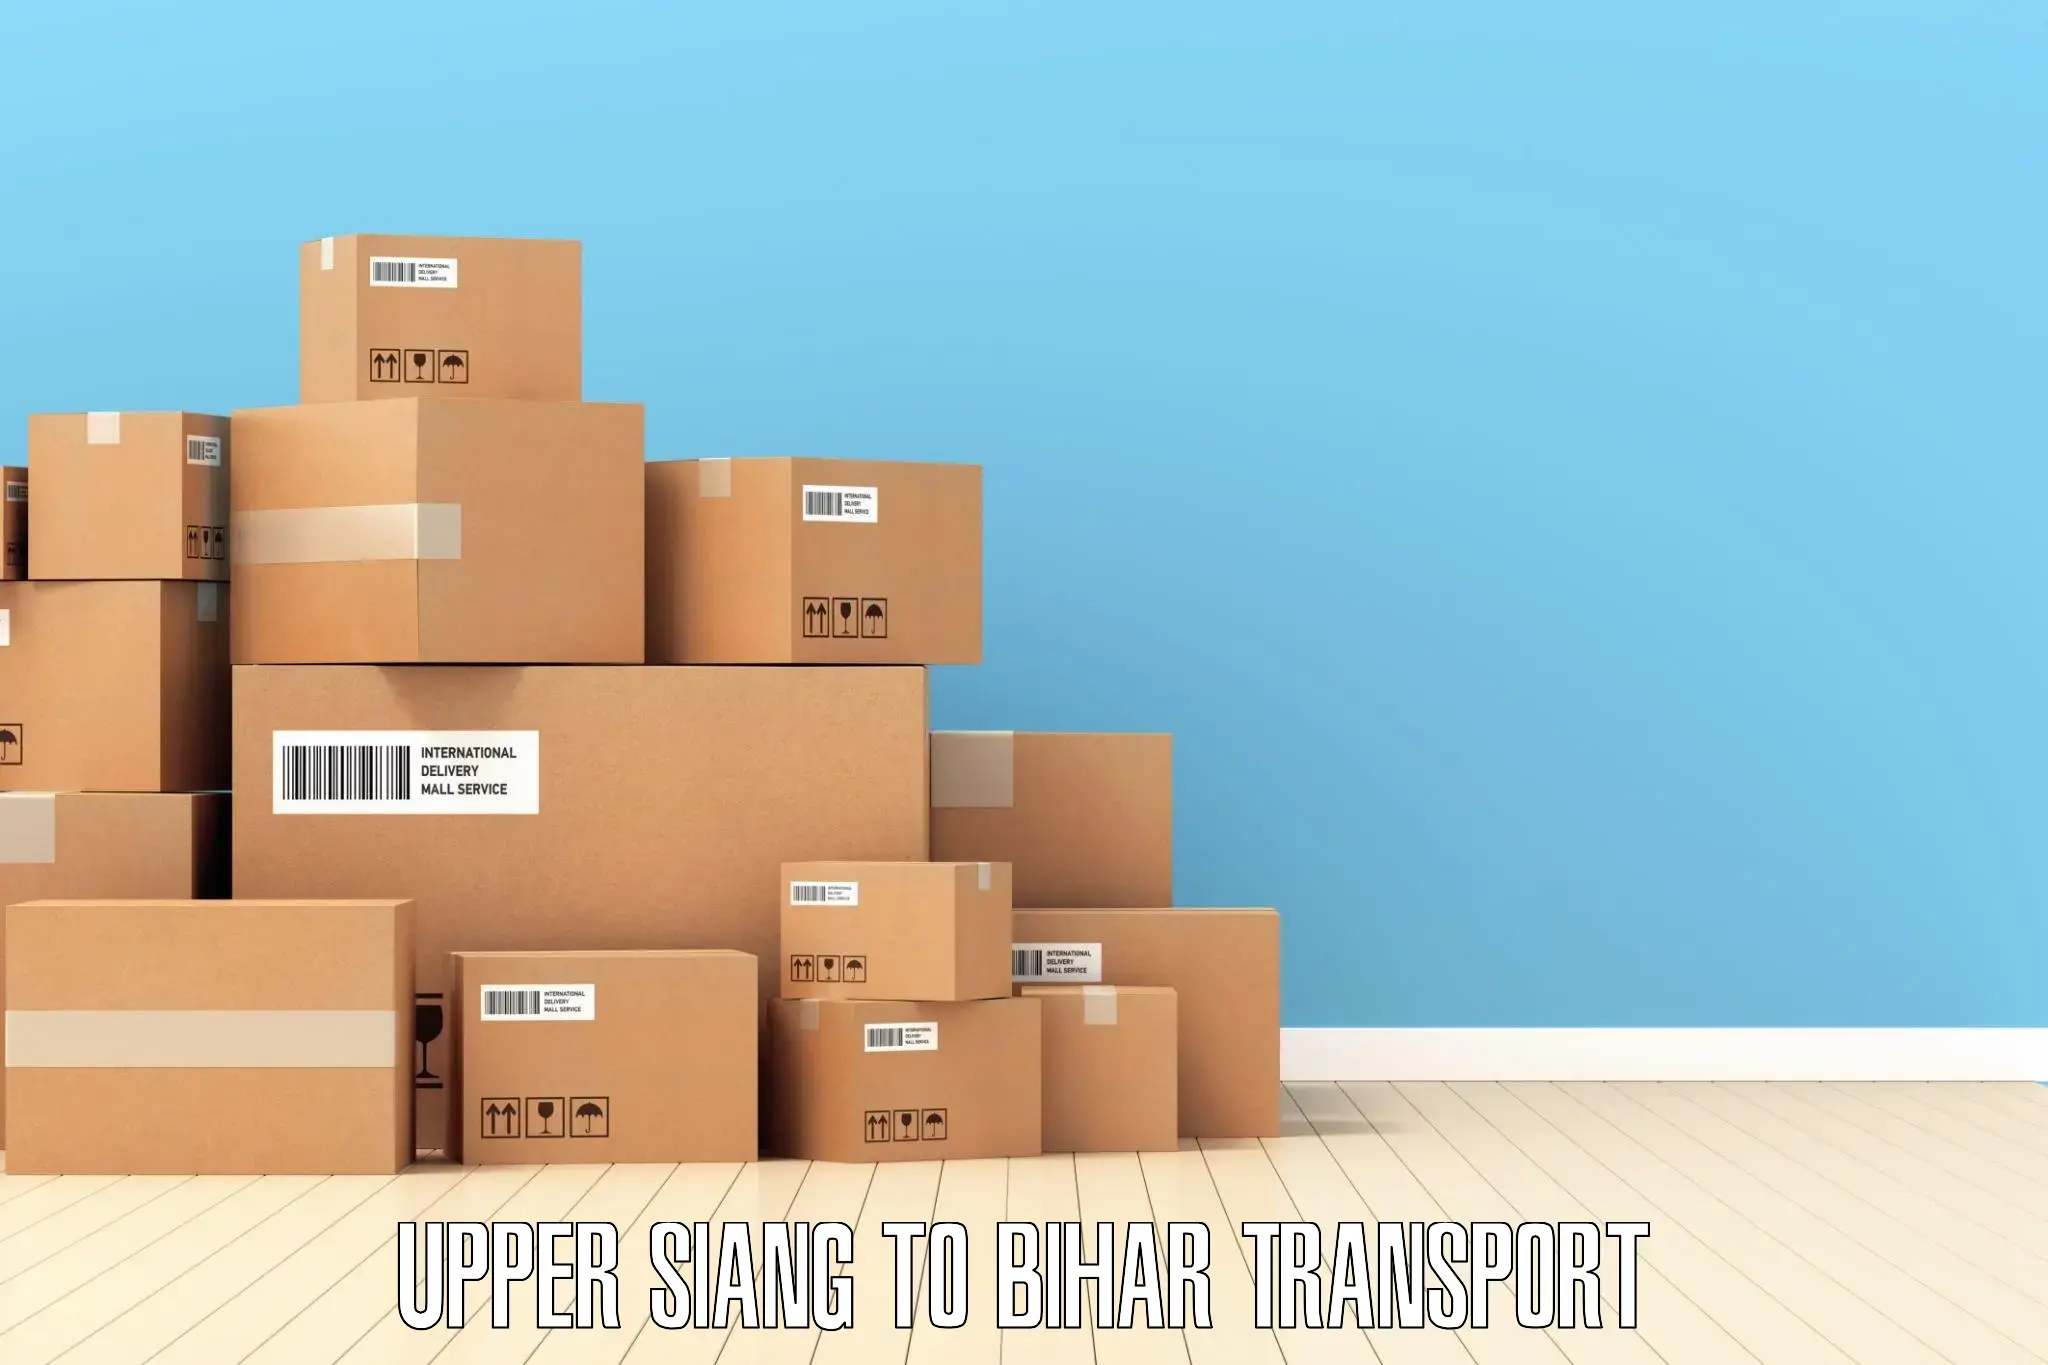 Pick up transport service Upper Siang to Sheohar